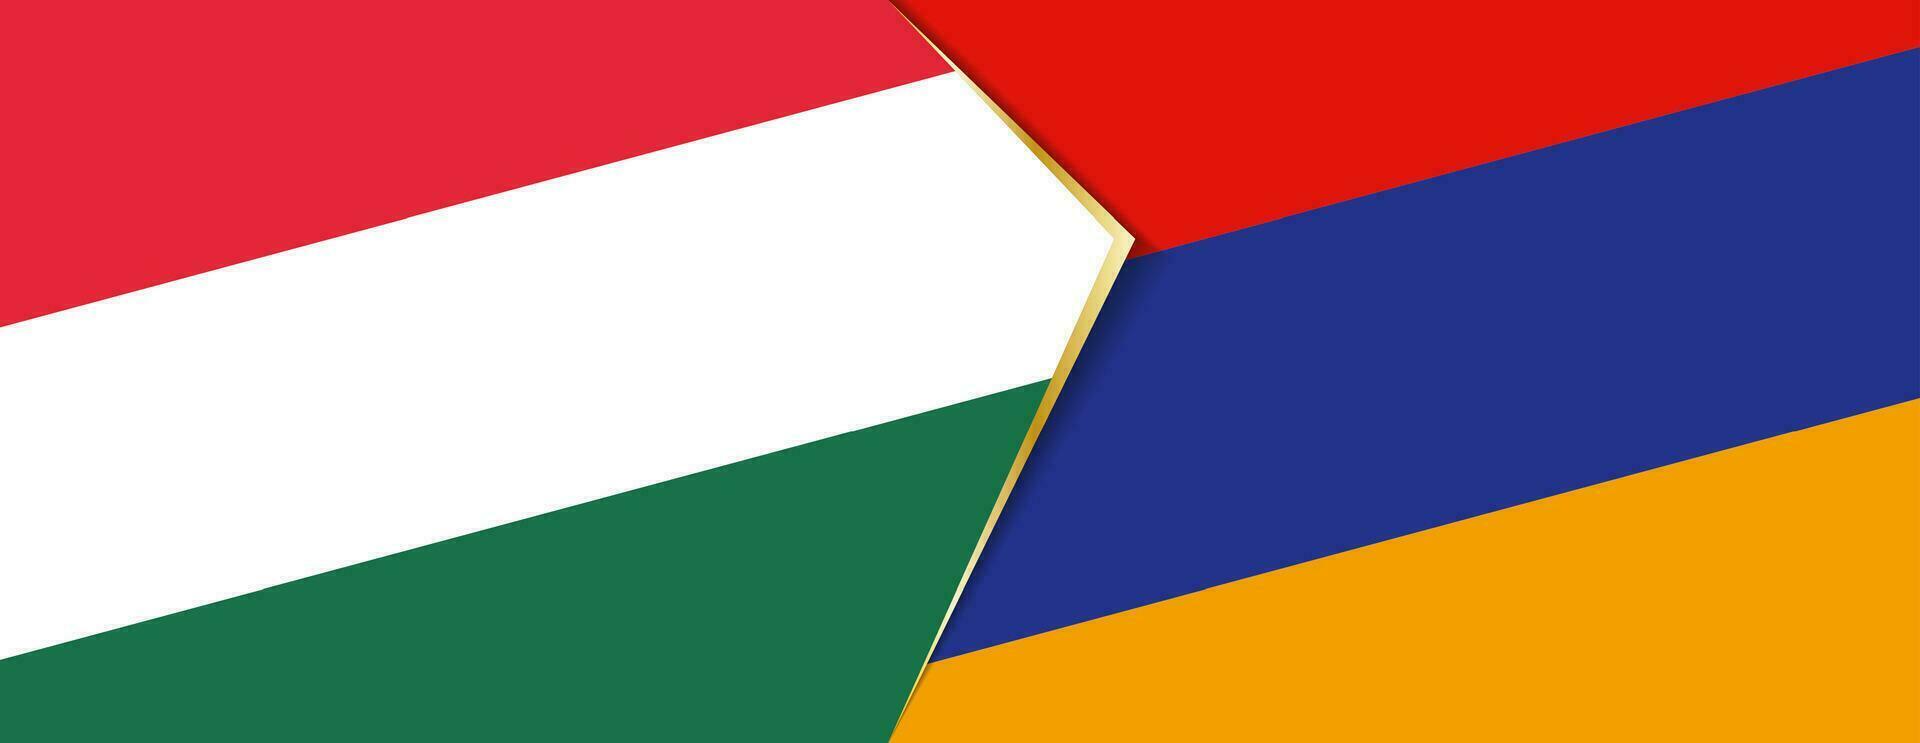 Hungary and Armenia flags, two vector flags.